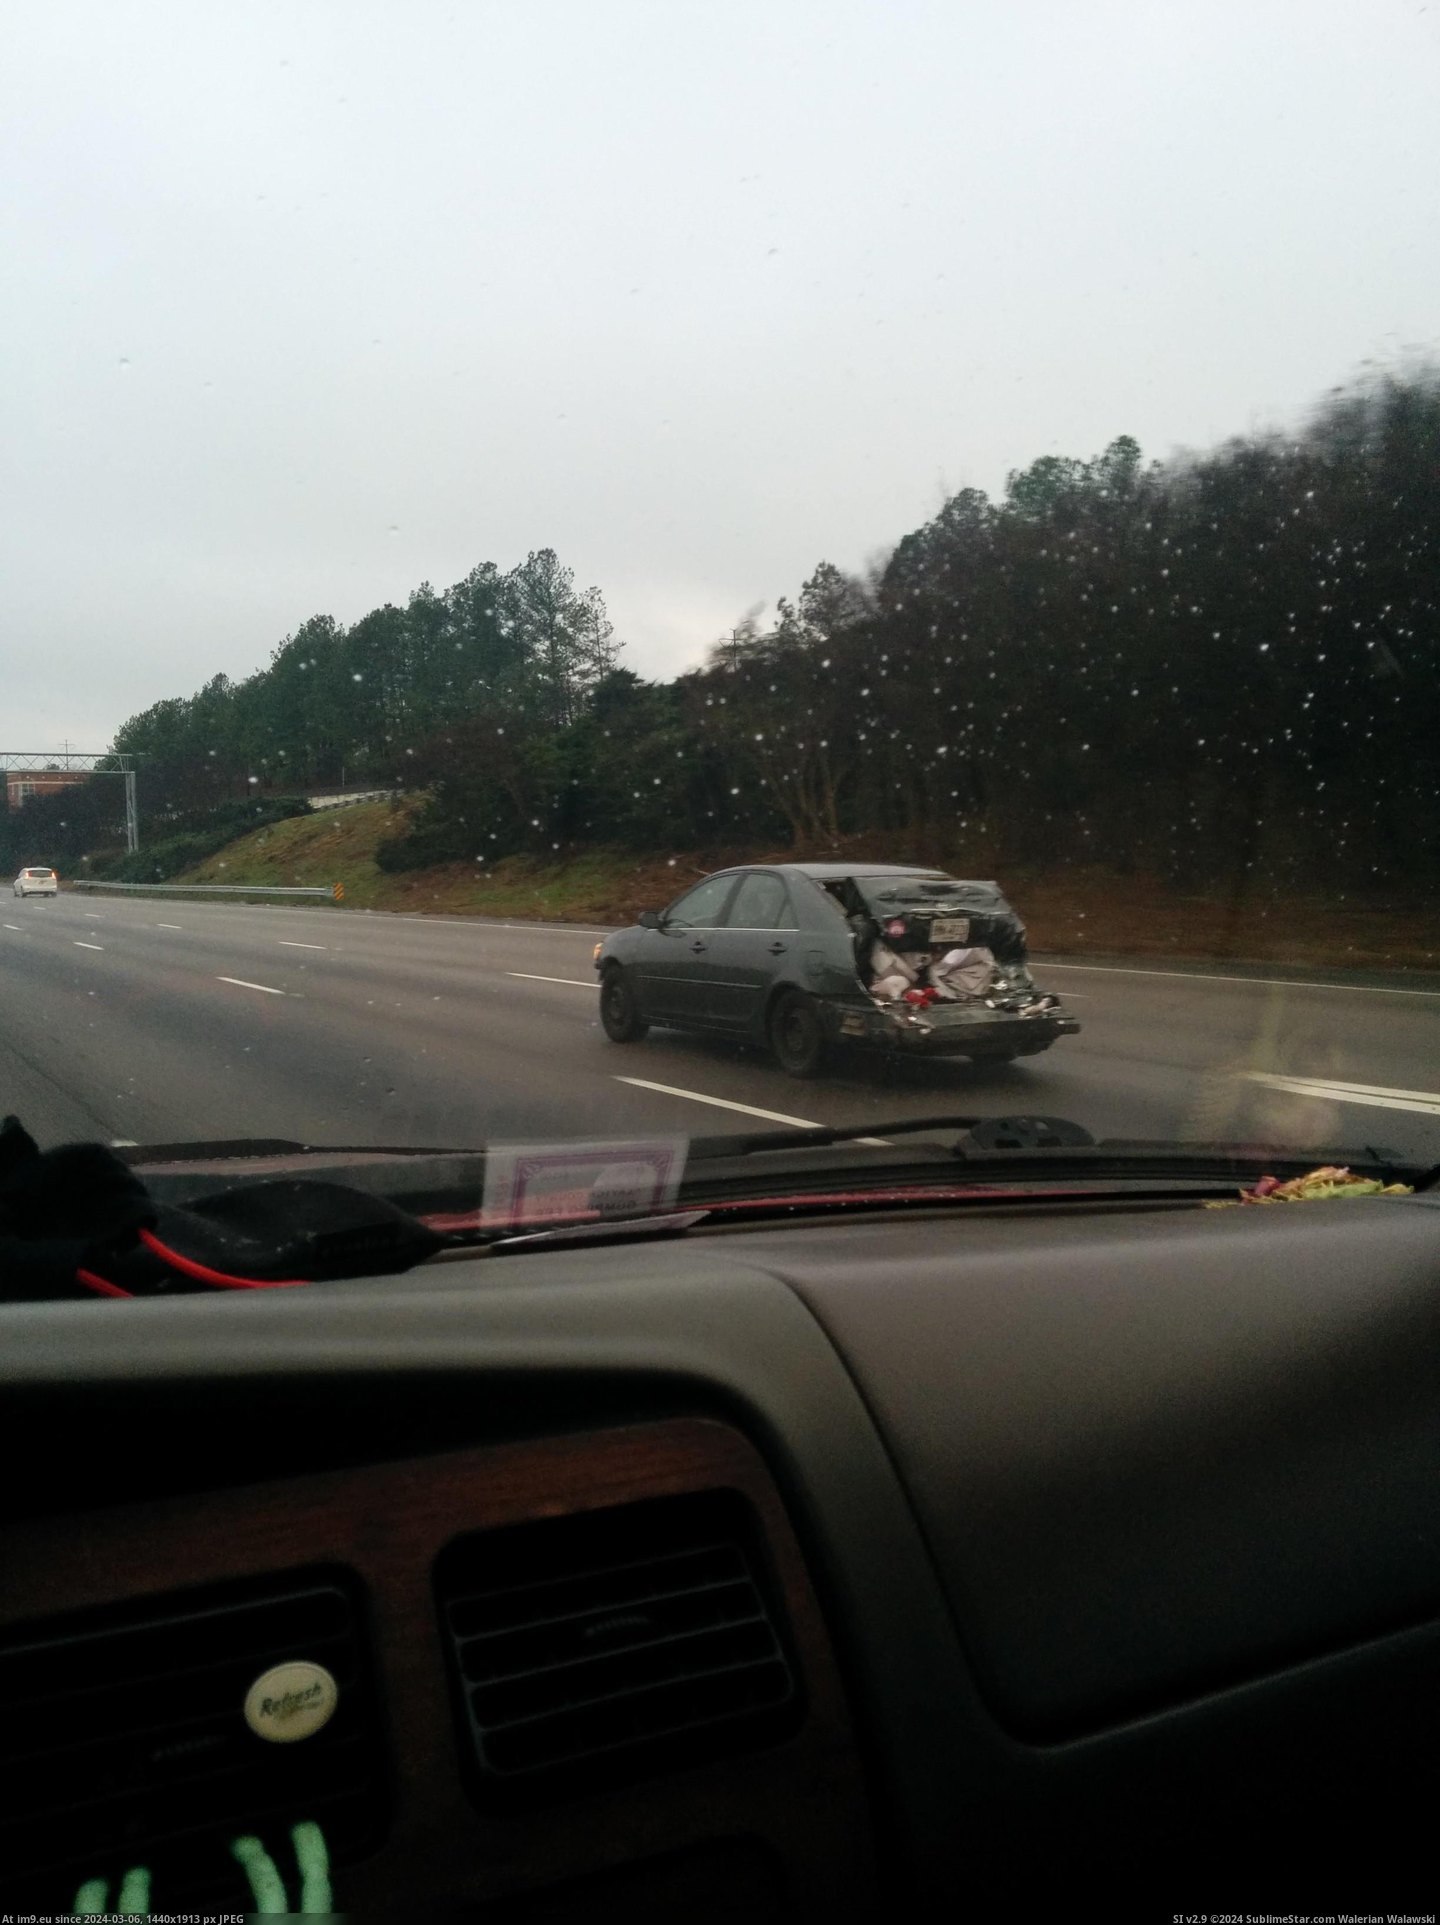 #Wtf #Stuff #Had #Falling #Caused #Fucker #Car #Off #Accident [Wtf] This fucker had stuff falling off his car and caused an accident. Pic. (Image of album My r/WTF favs))